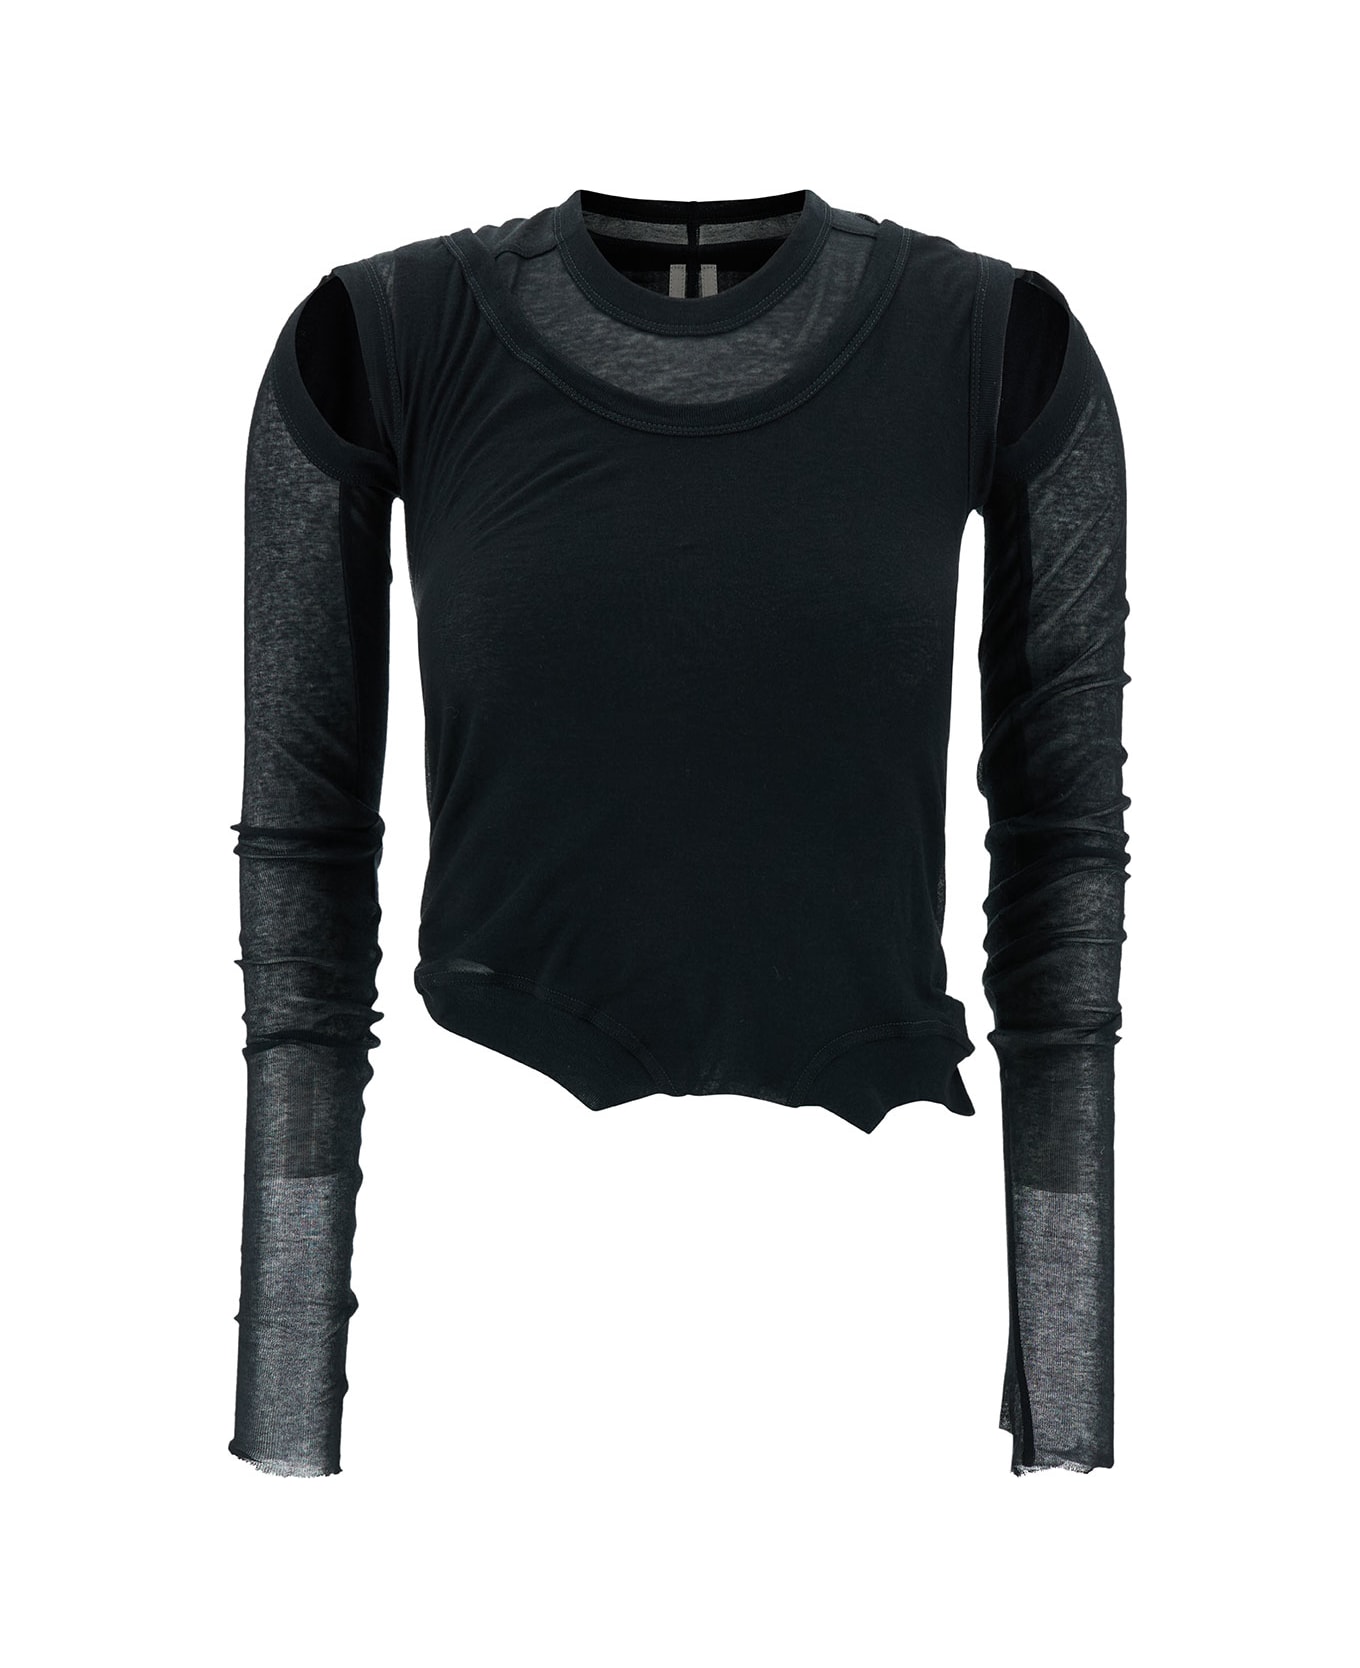 Rick Owens Black Asymmetric Long Sleeve Top With Cut-out In Cotton Woman - Black